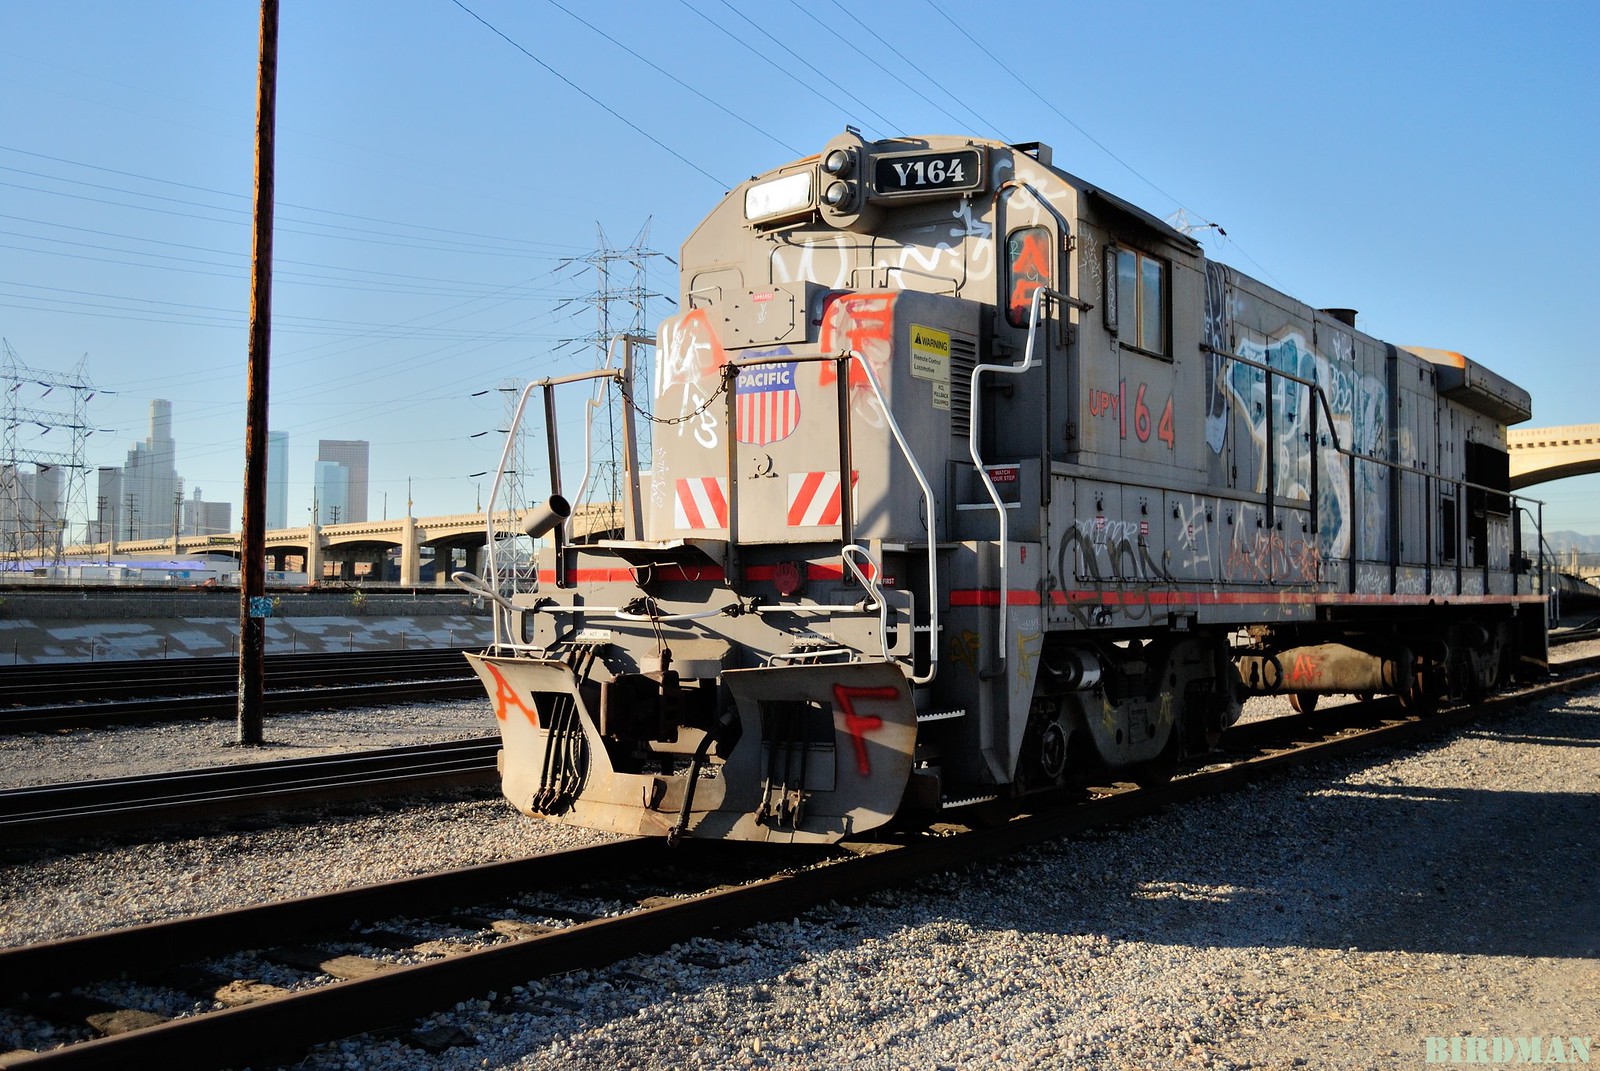 Close up of a freight train with graffiti passing on the outskirts of Los Angeles.